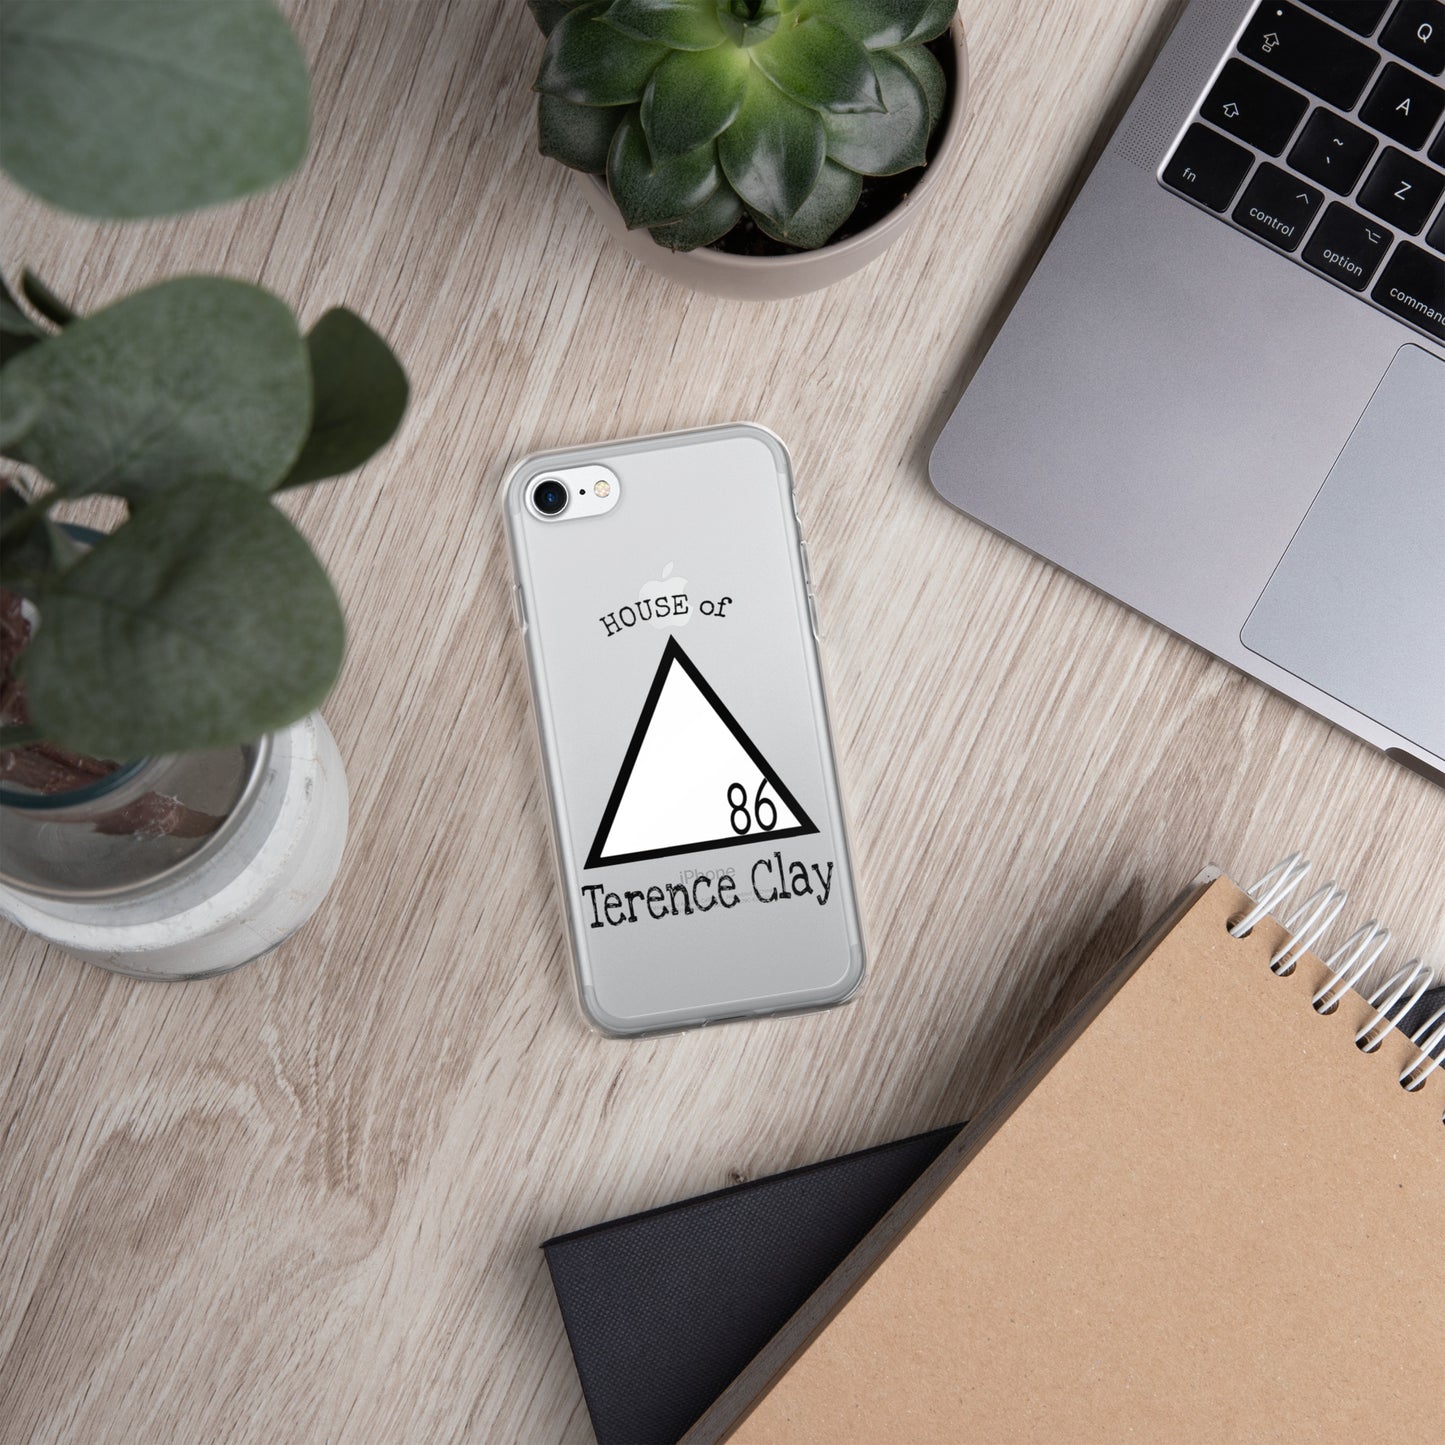 "HOUSE of Terence Clay logo" iPhone Case